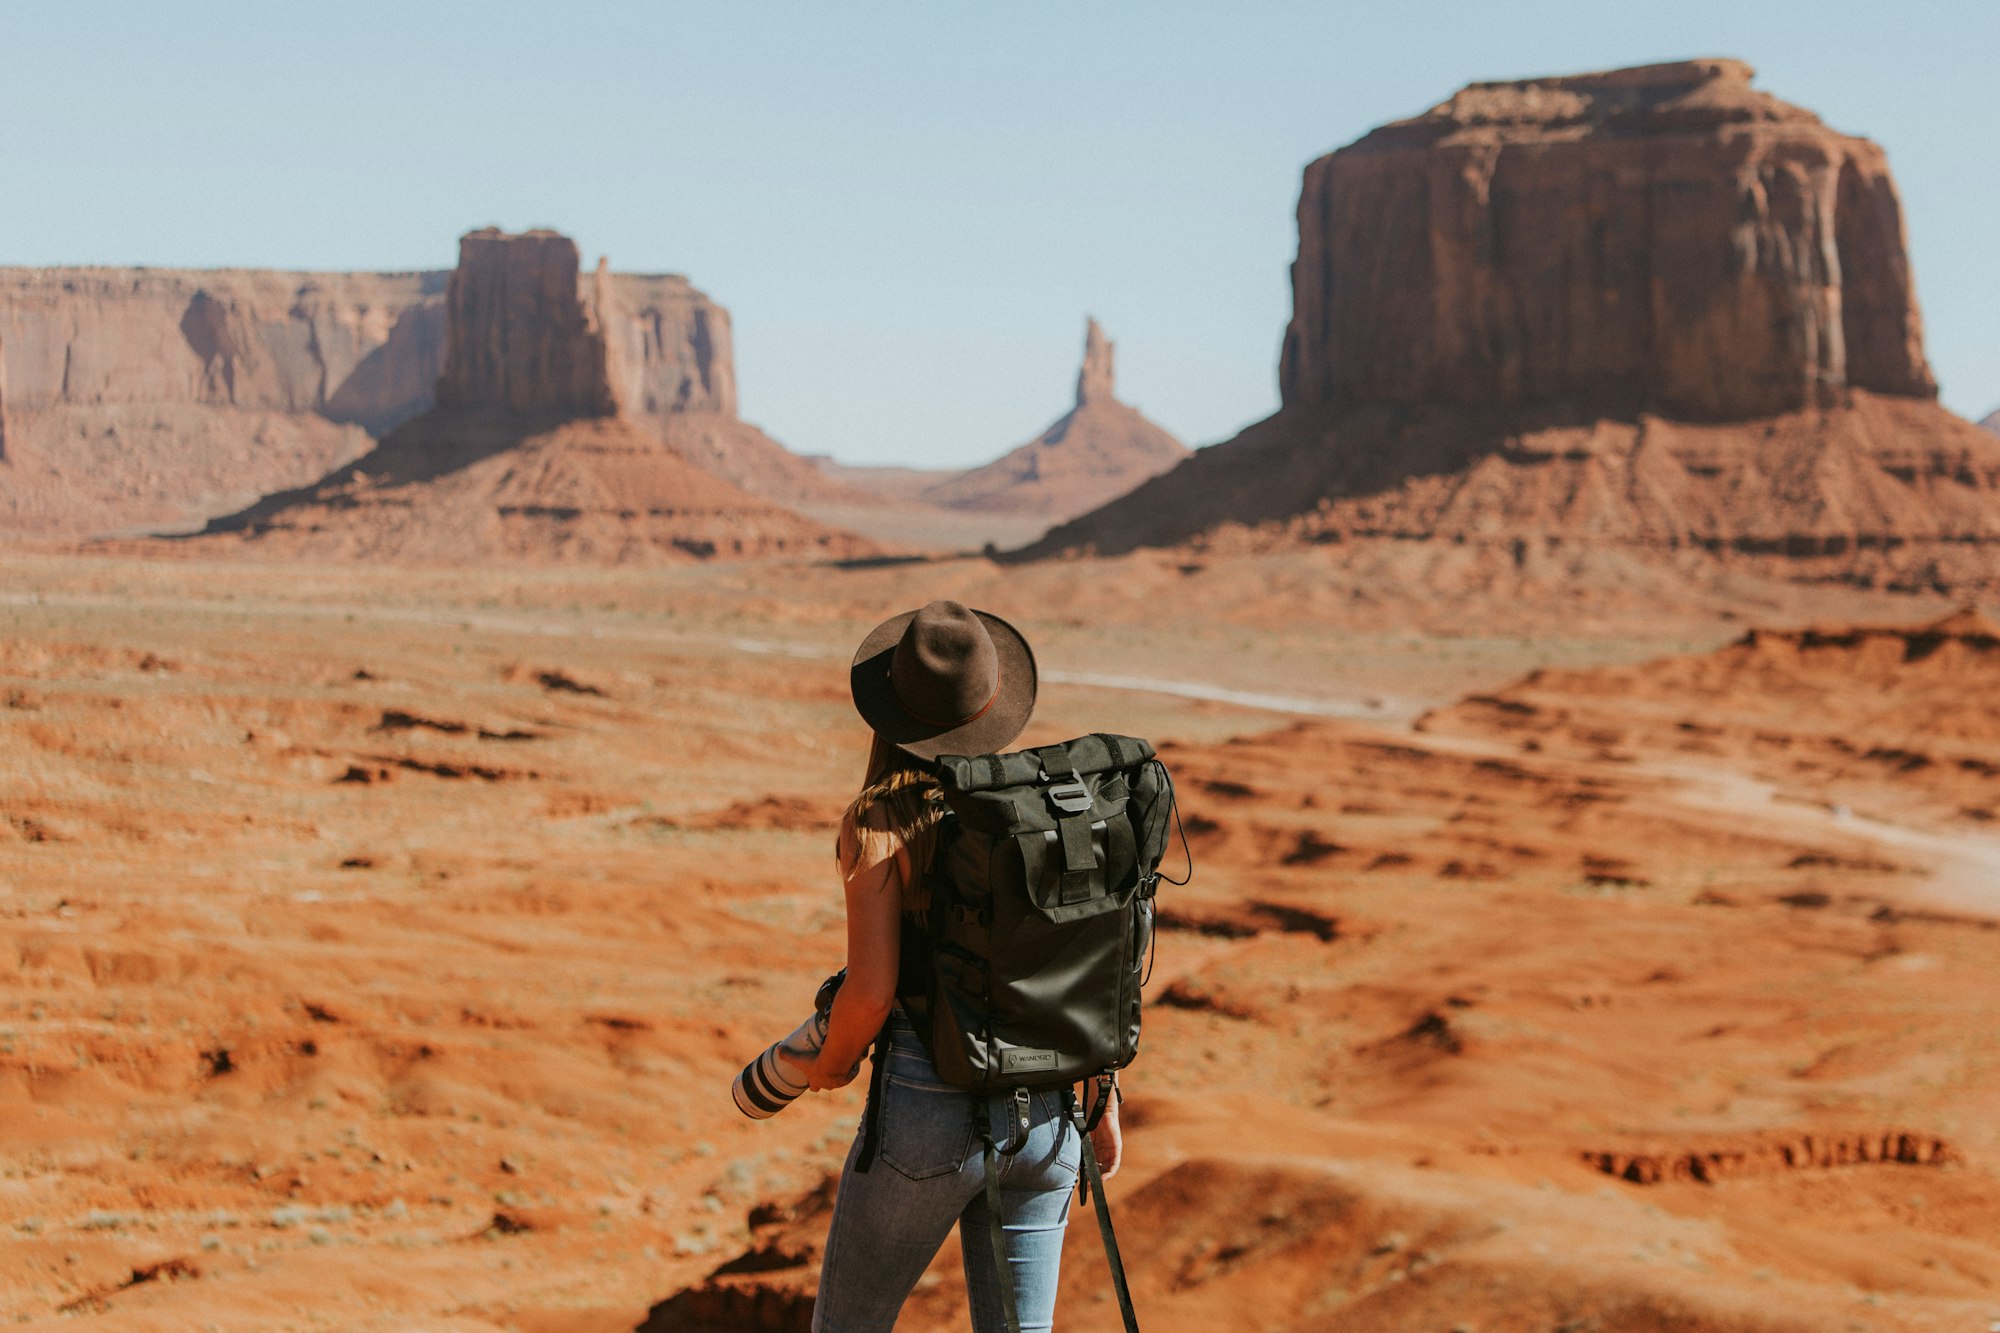 Backpacking Solo: How to Plan an Exhilarating & Safe Budget Trip